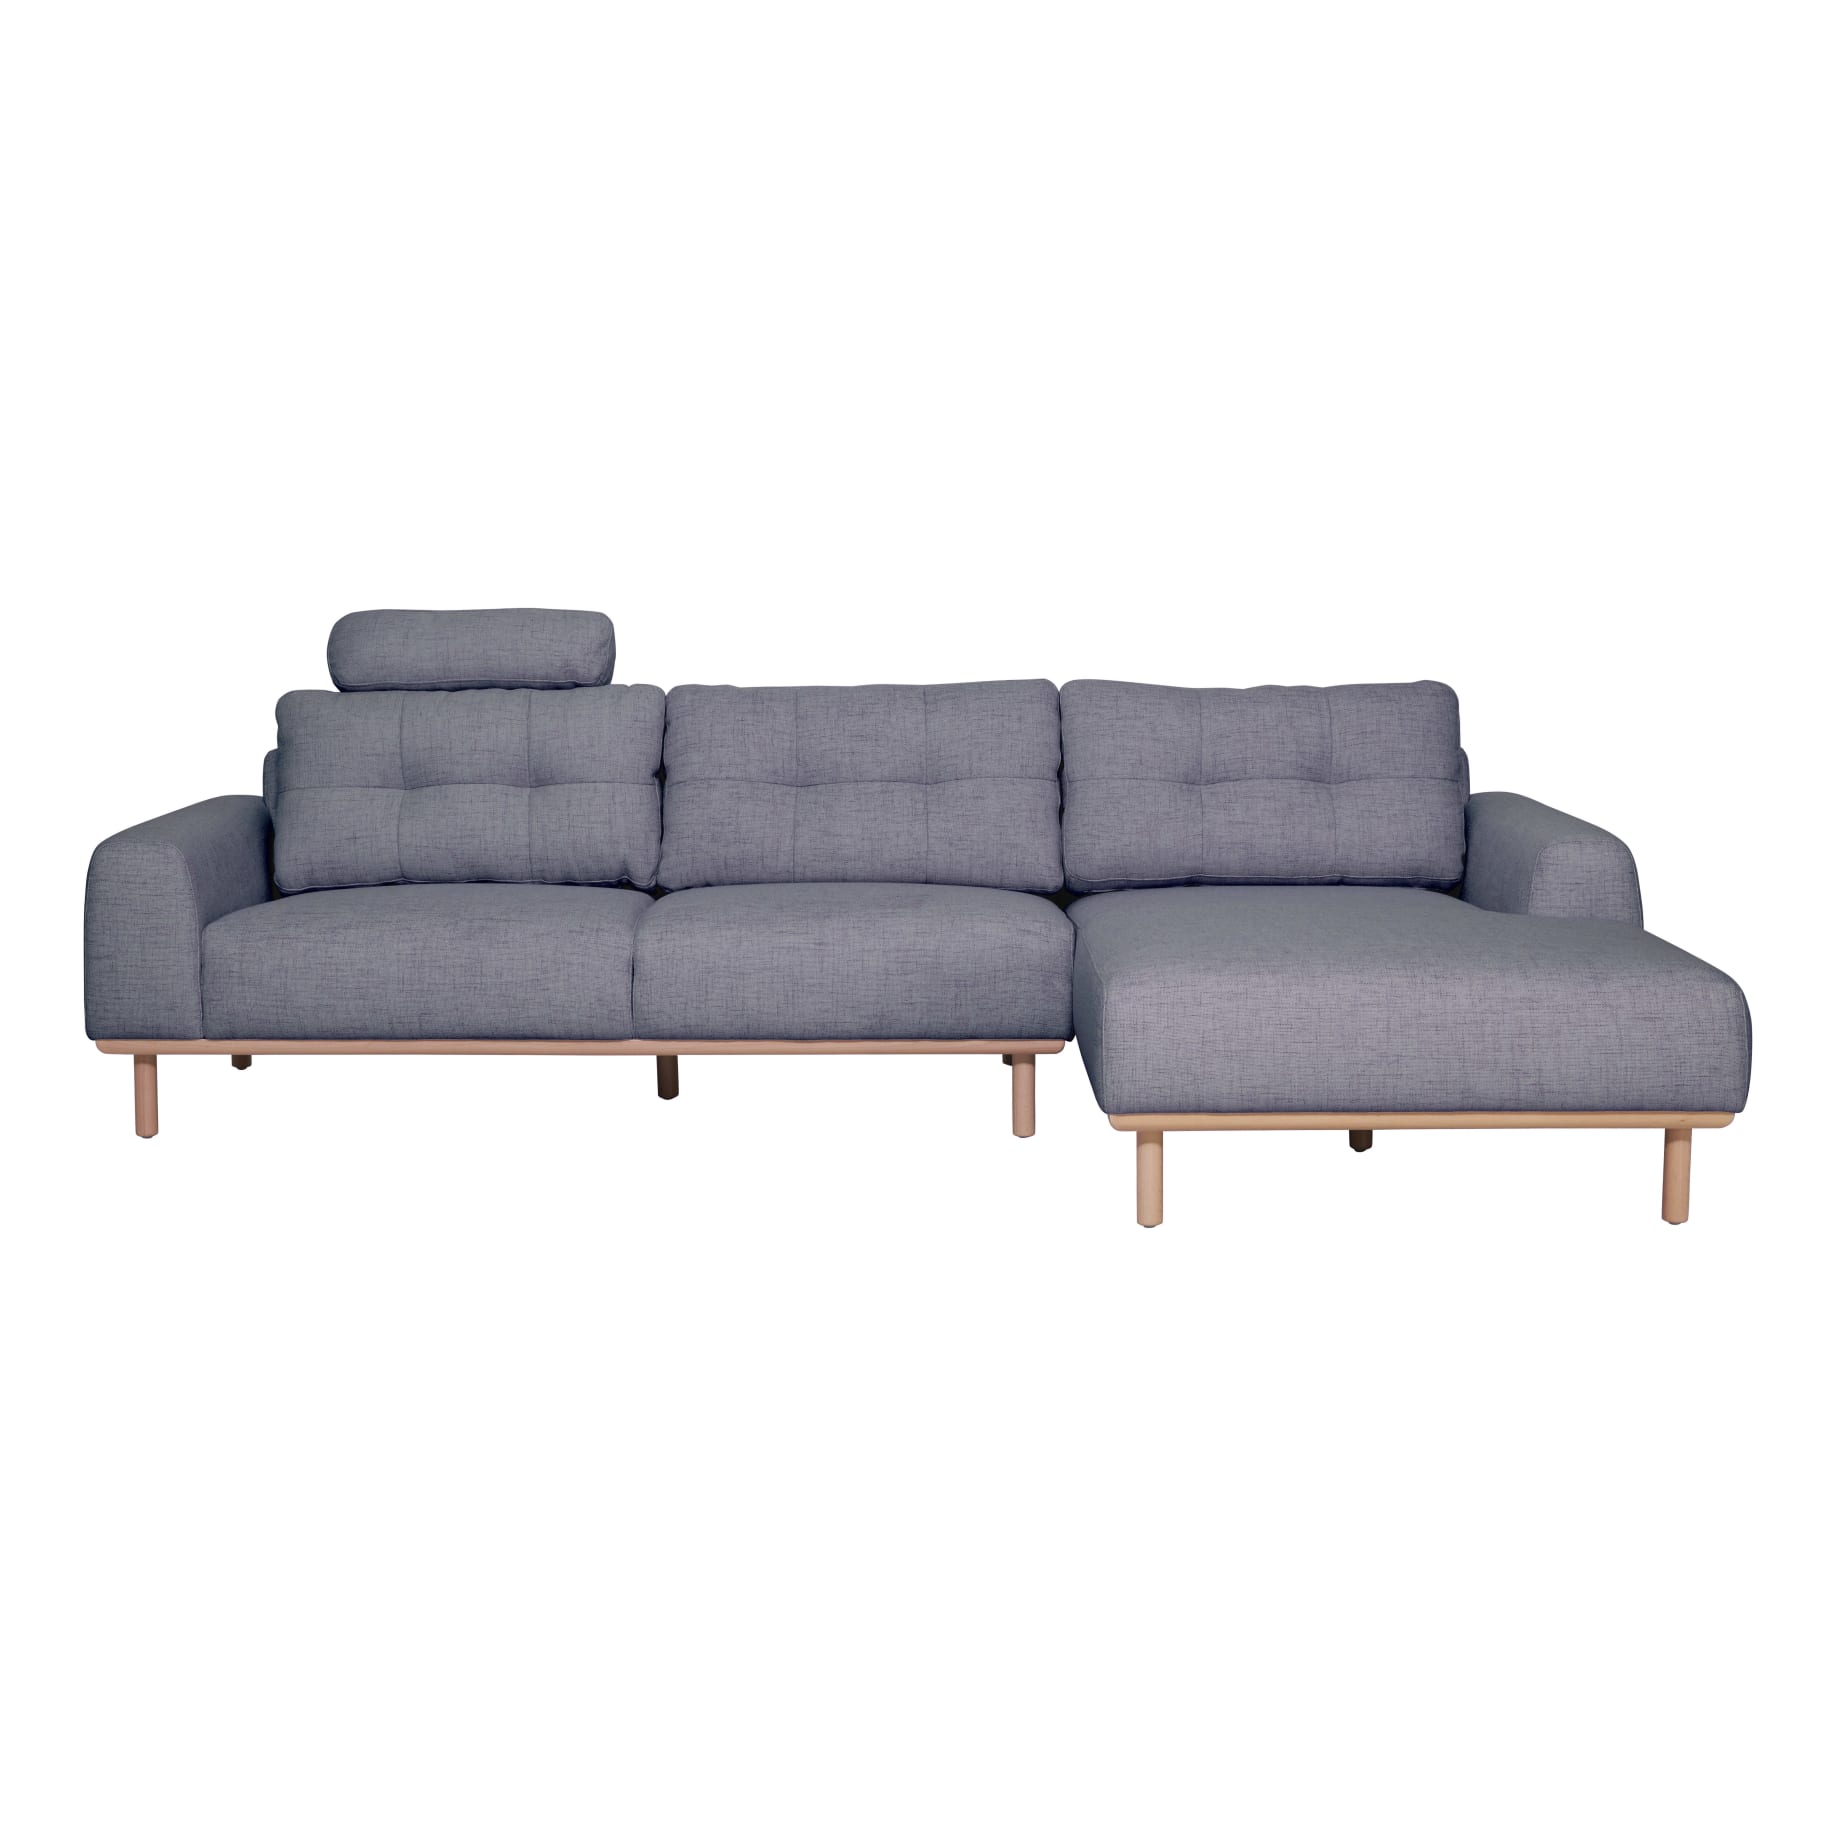 Stratton 3 Seater+Chaise RHF in Cloud Pewter